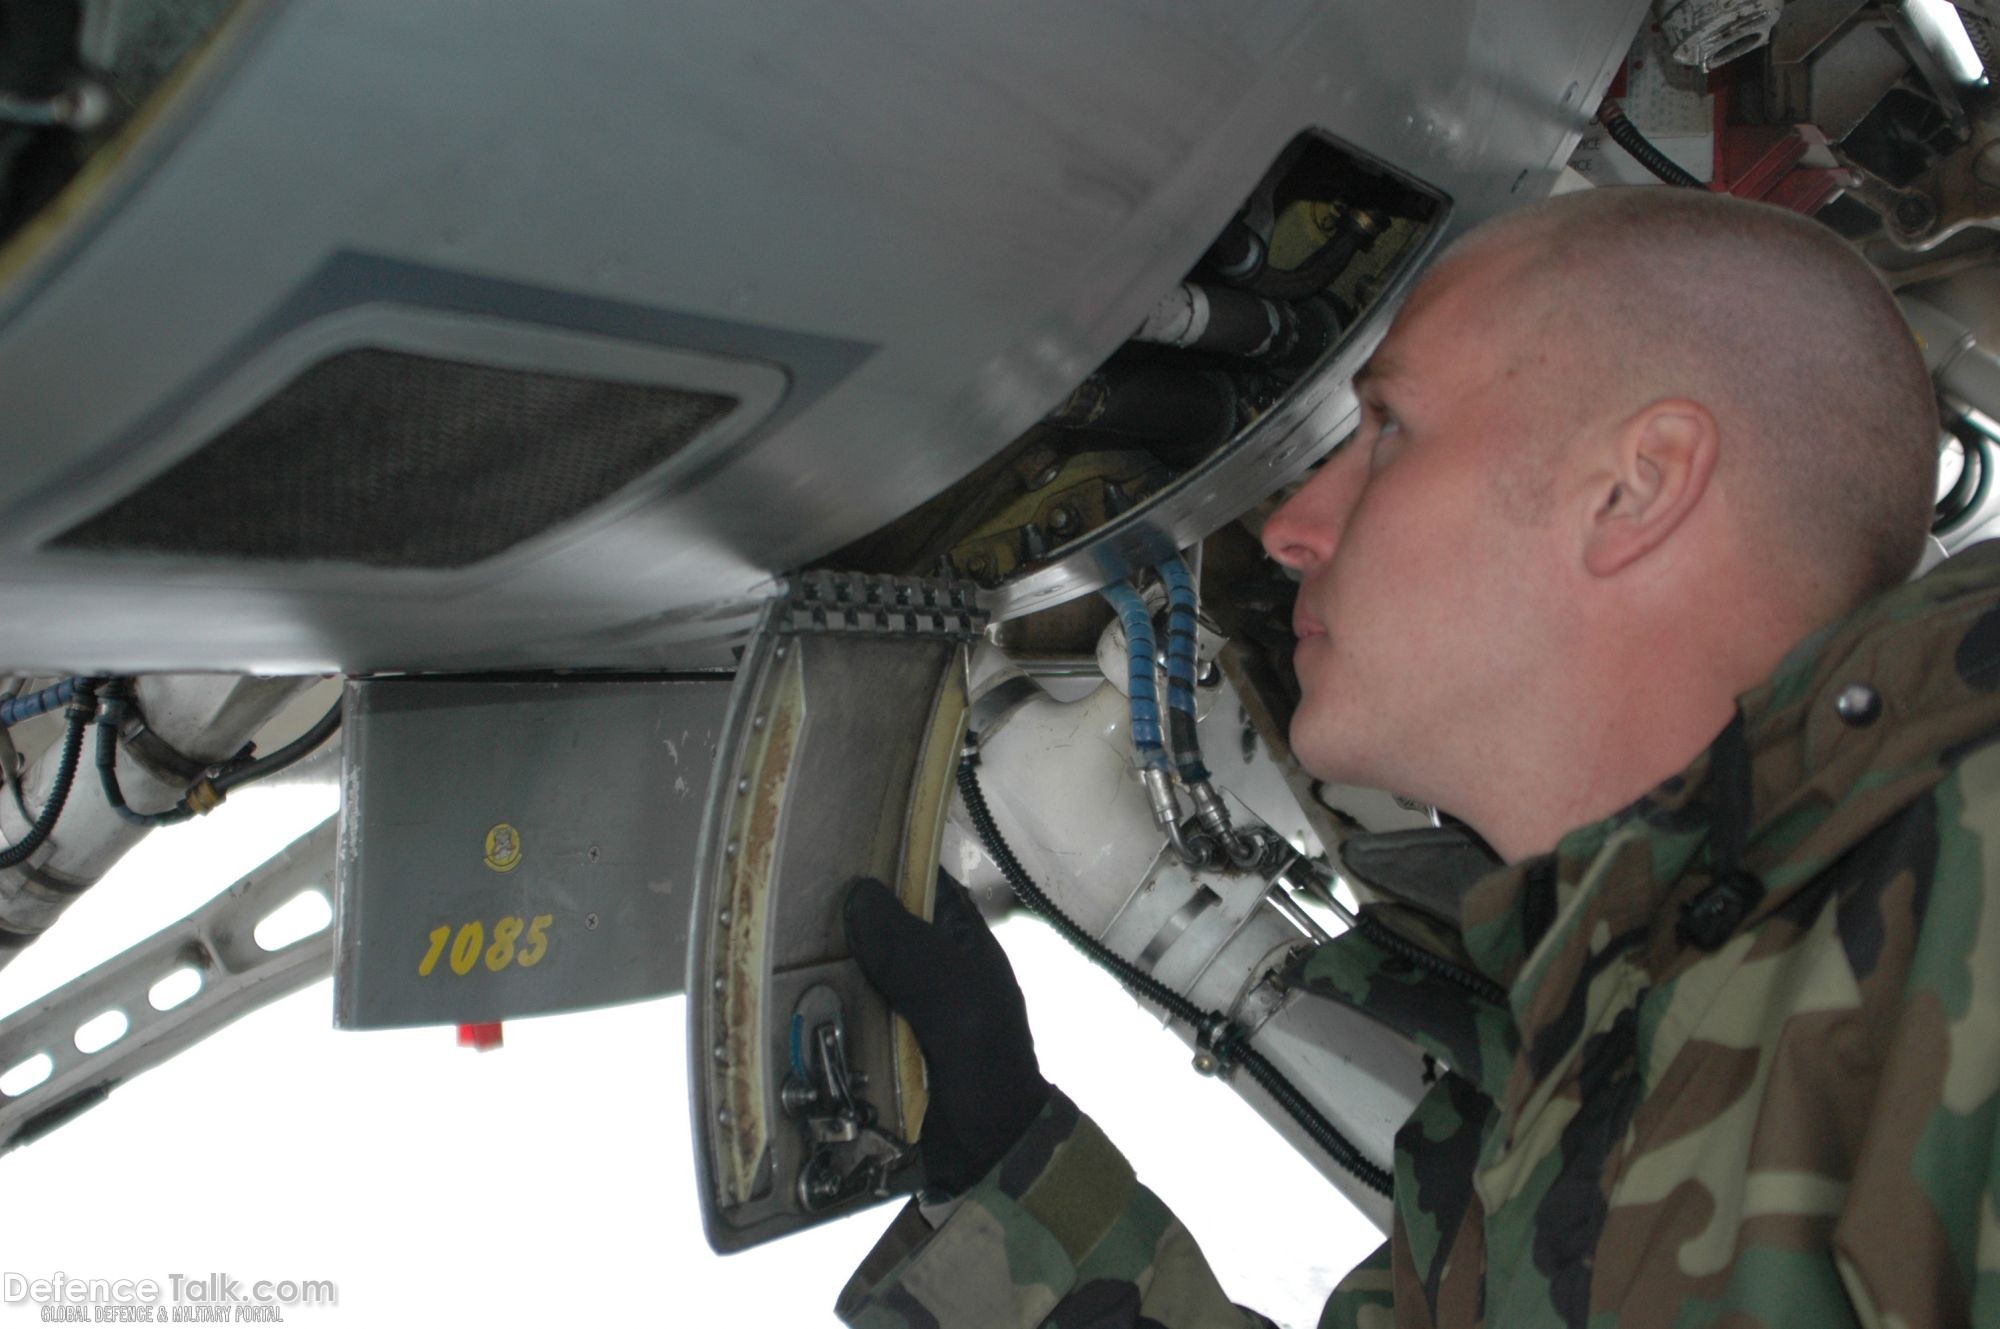 Preflight inspections on an F-16 - US Air Force Exercise